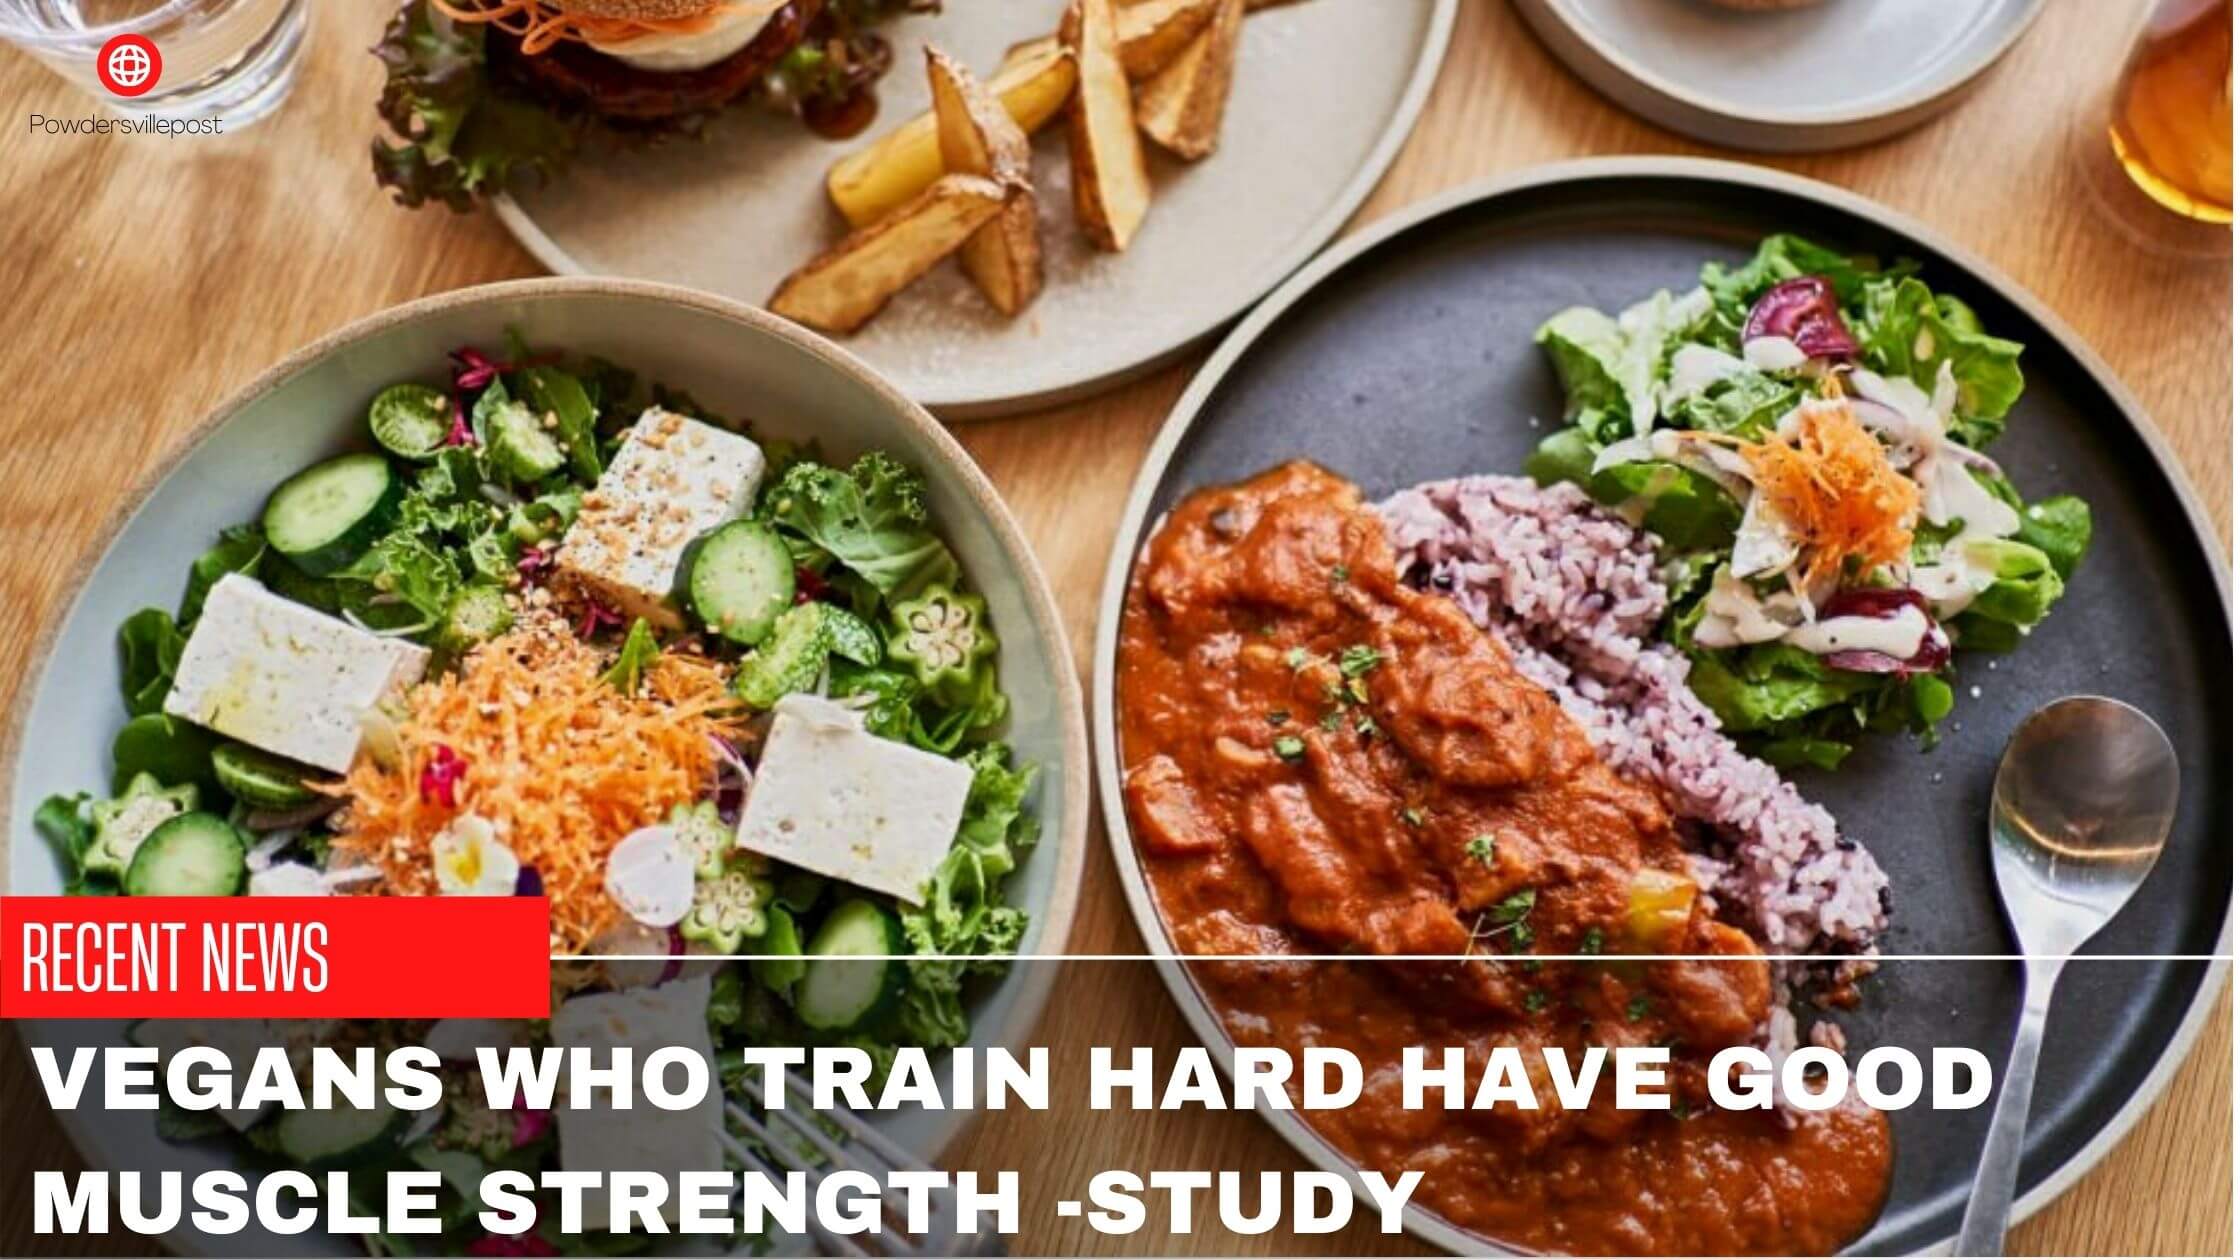 Vegans Who Train Hard Have Good Muscle Strength -Study